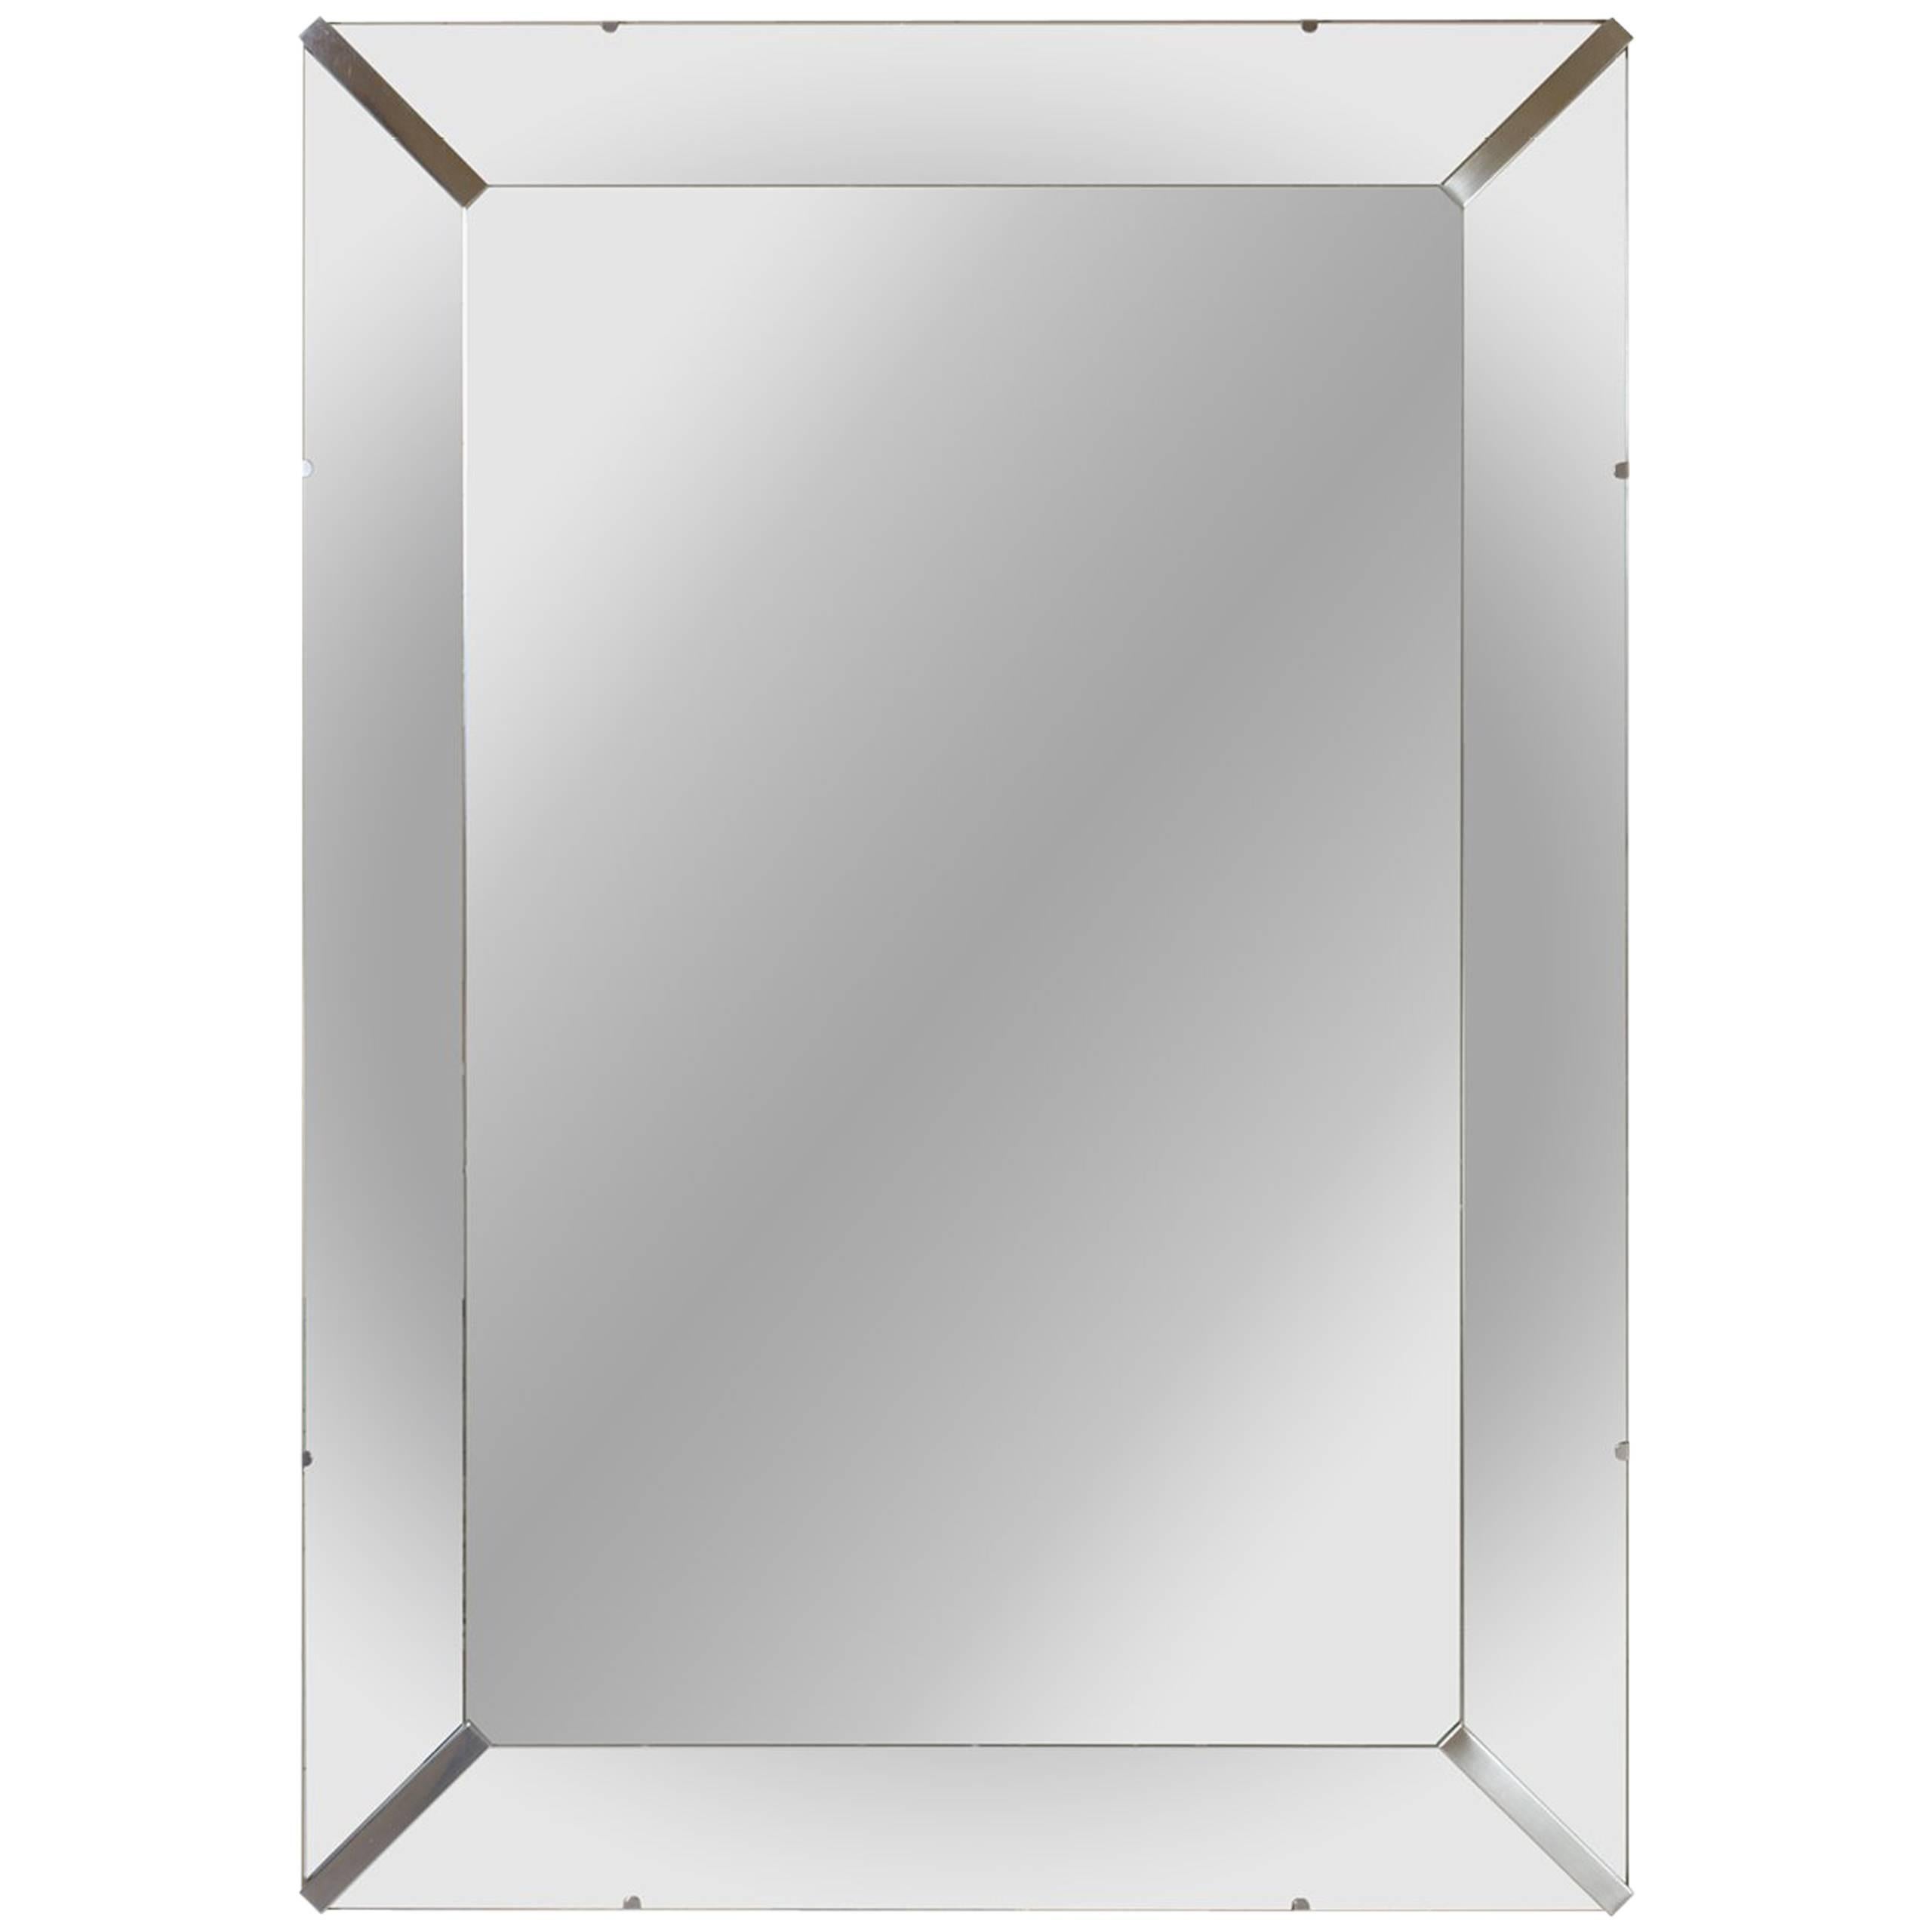 Grand Beveled Mirror with Nickel Corner Accents For Sale